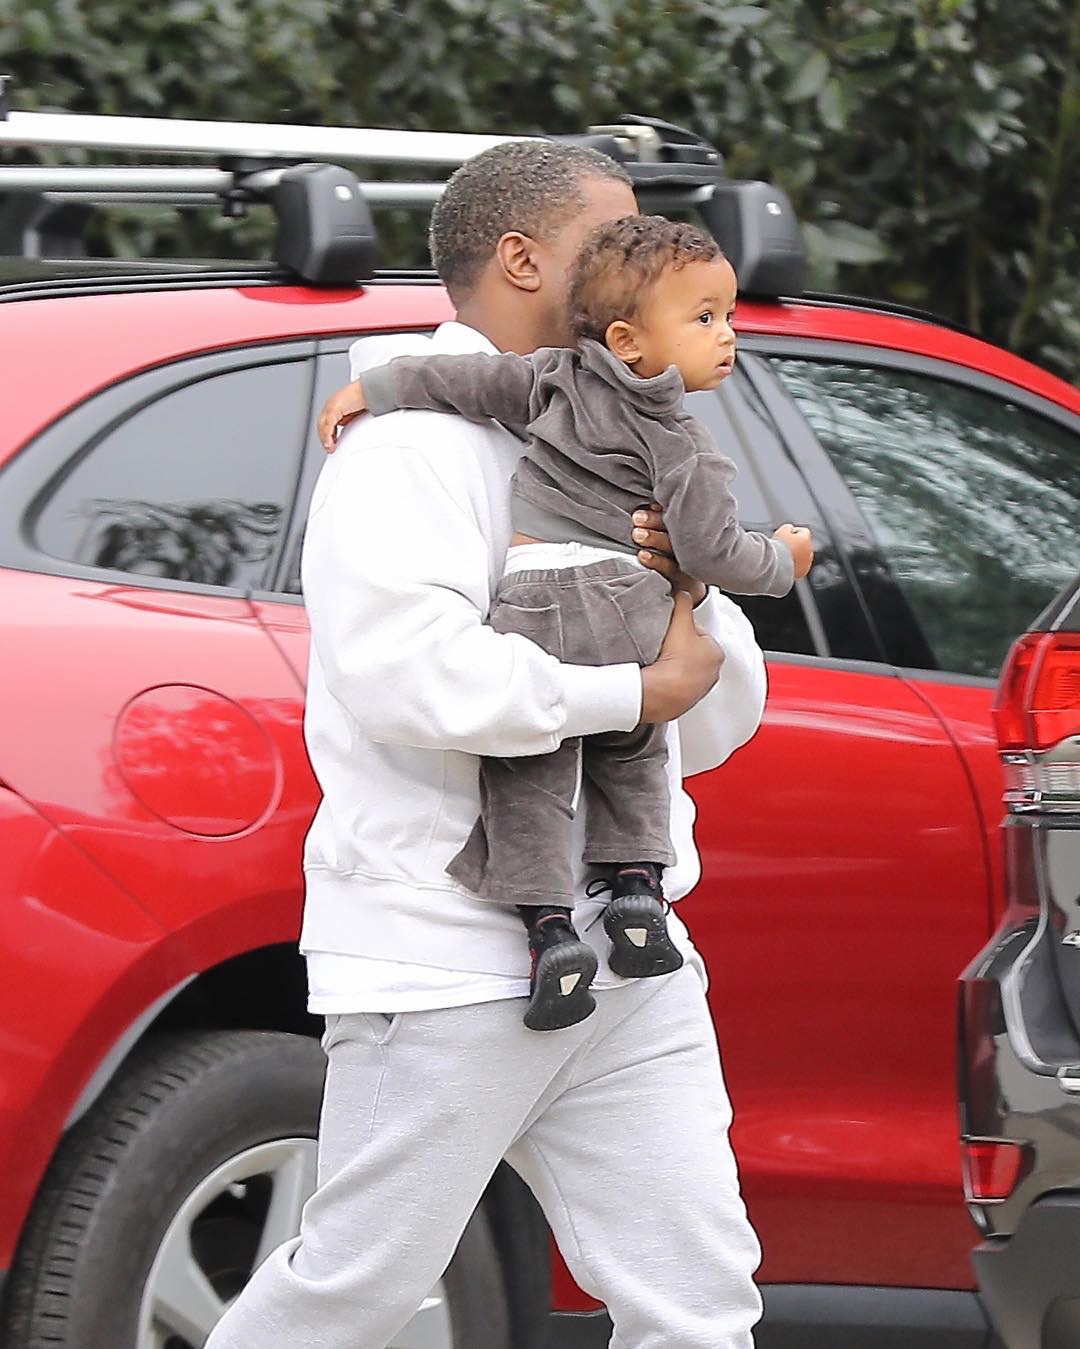 SPOTTED: Kanye West Wearing Champion Joggers and Yeezy Season Calabasas Sneakers – PAUSE Online Men's Fashion, Street Style, Fashion News & Streetwear